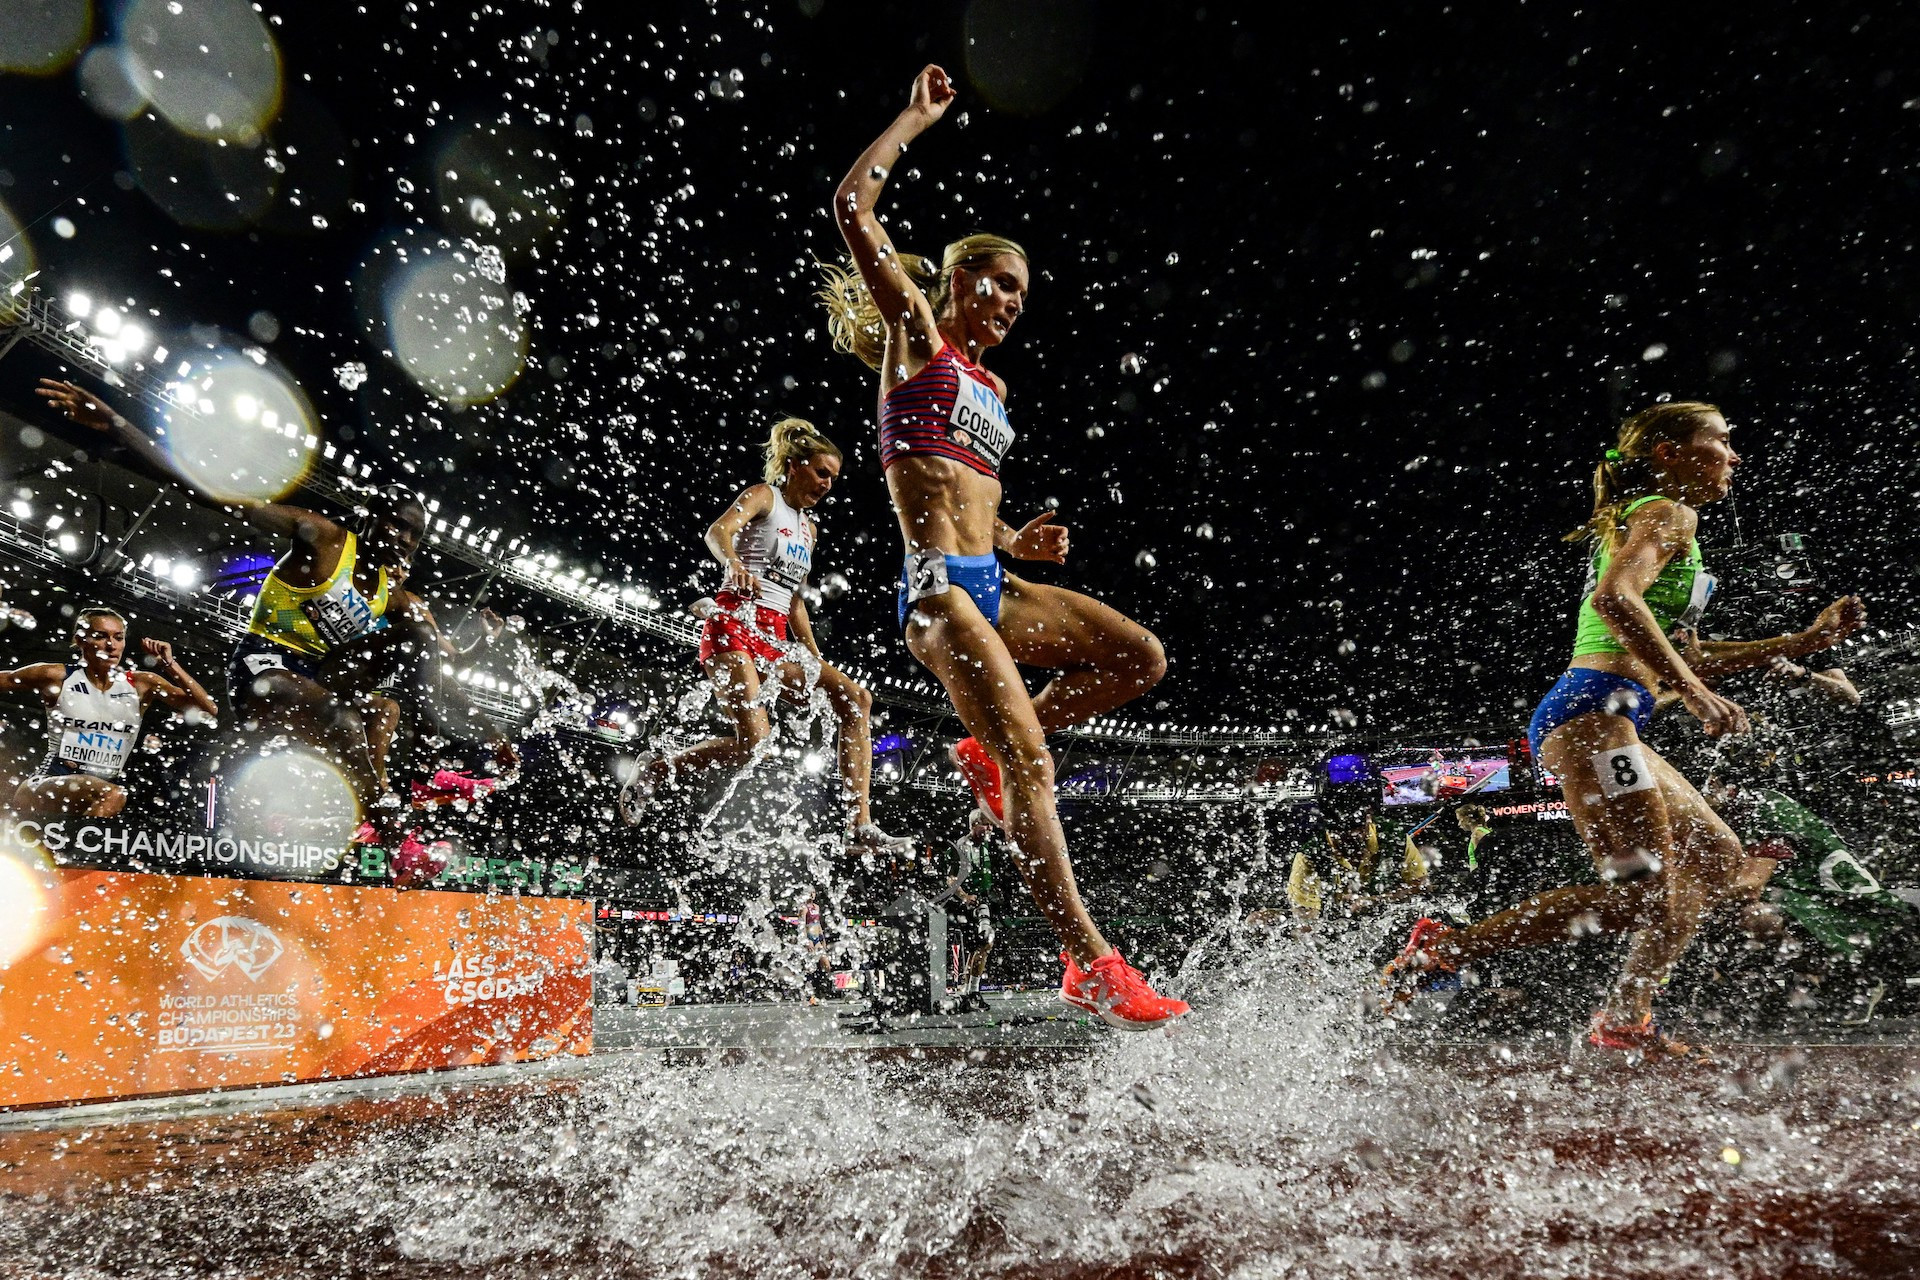  USA's Emma Coburn competes in the women's 3000m steeplechase during the World Athletics Championships. GETTY IMAGES